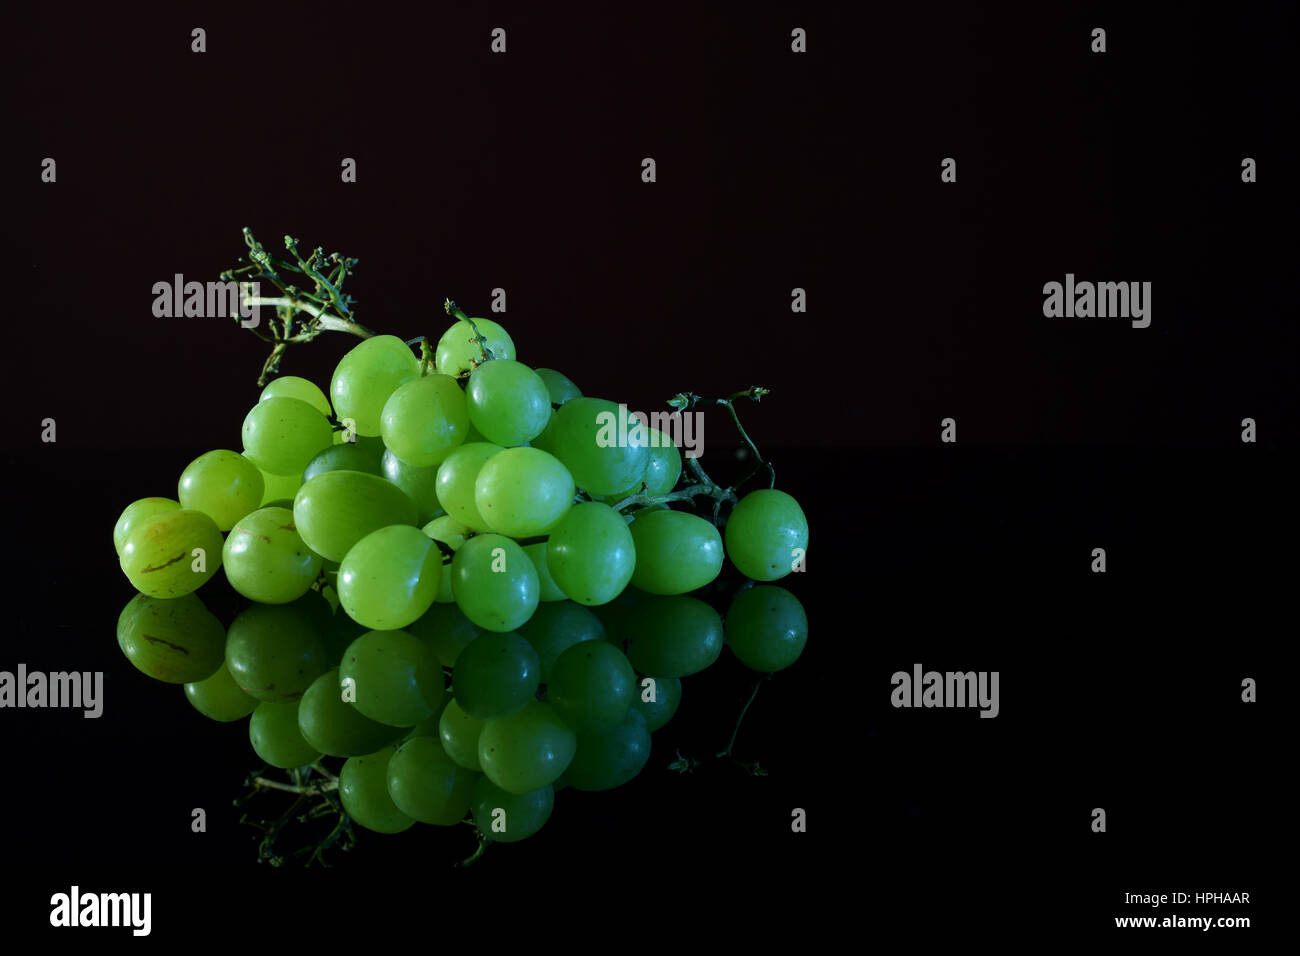 Green grapes on reflective black surface Stock Photo